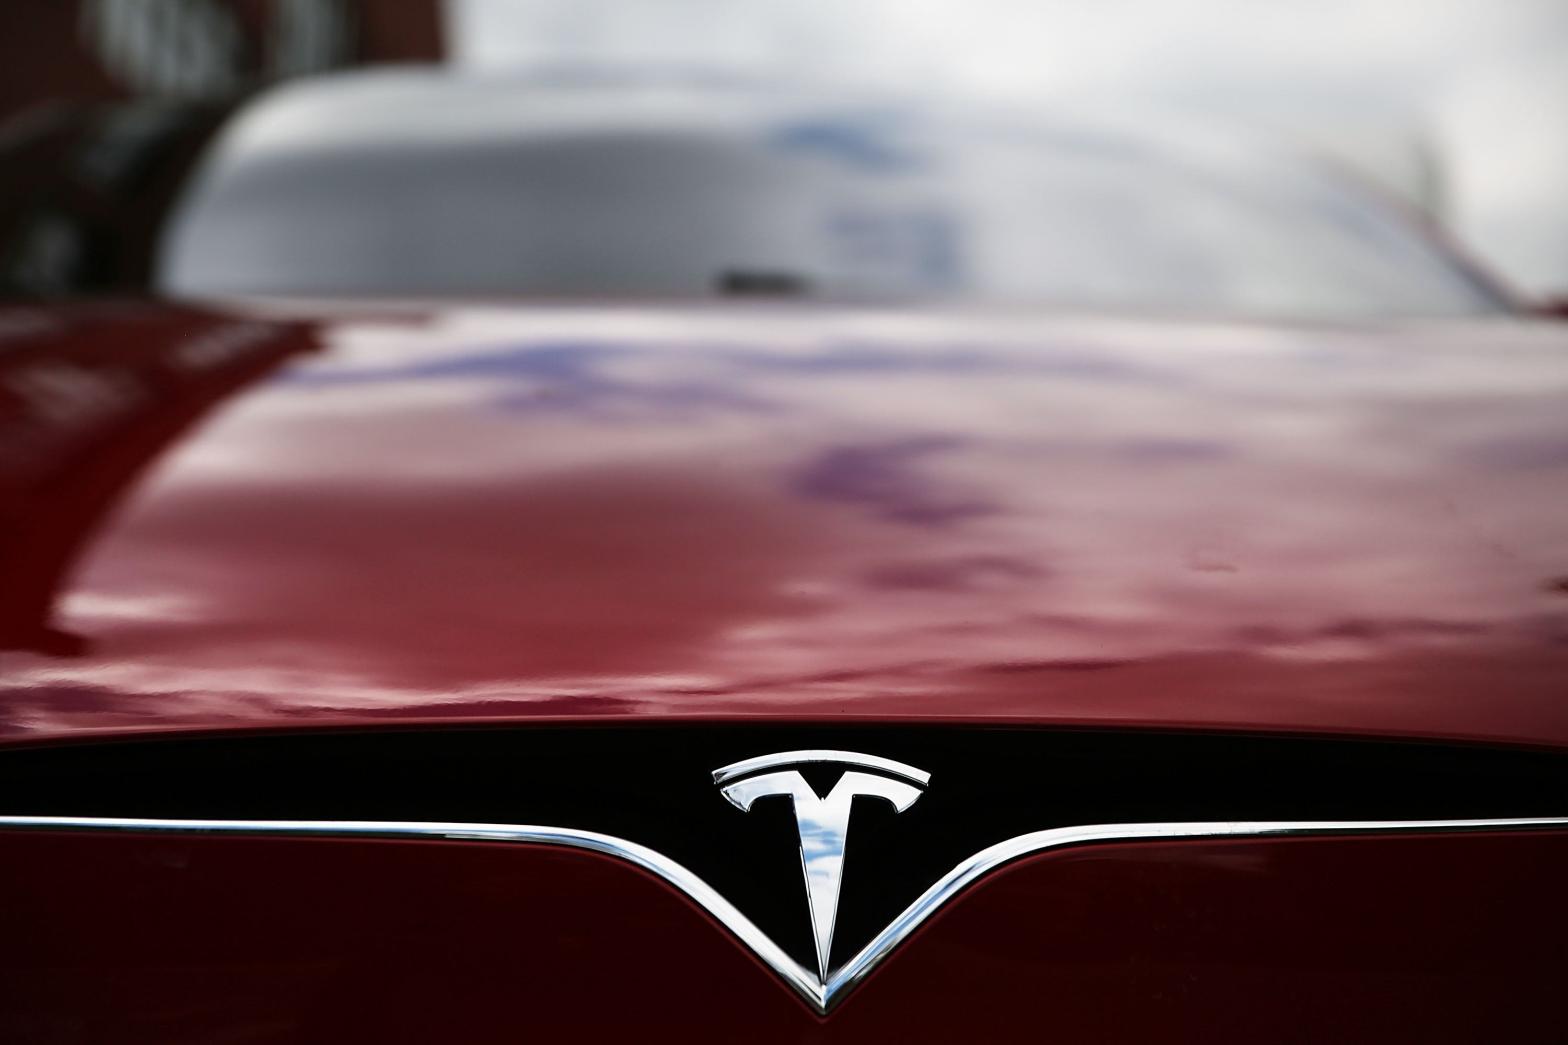 Tesla Says Autopilot Is Safer for Drivers—but That’s Not the Whole Story